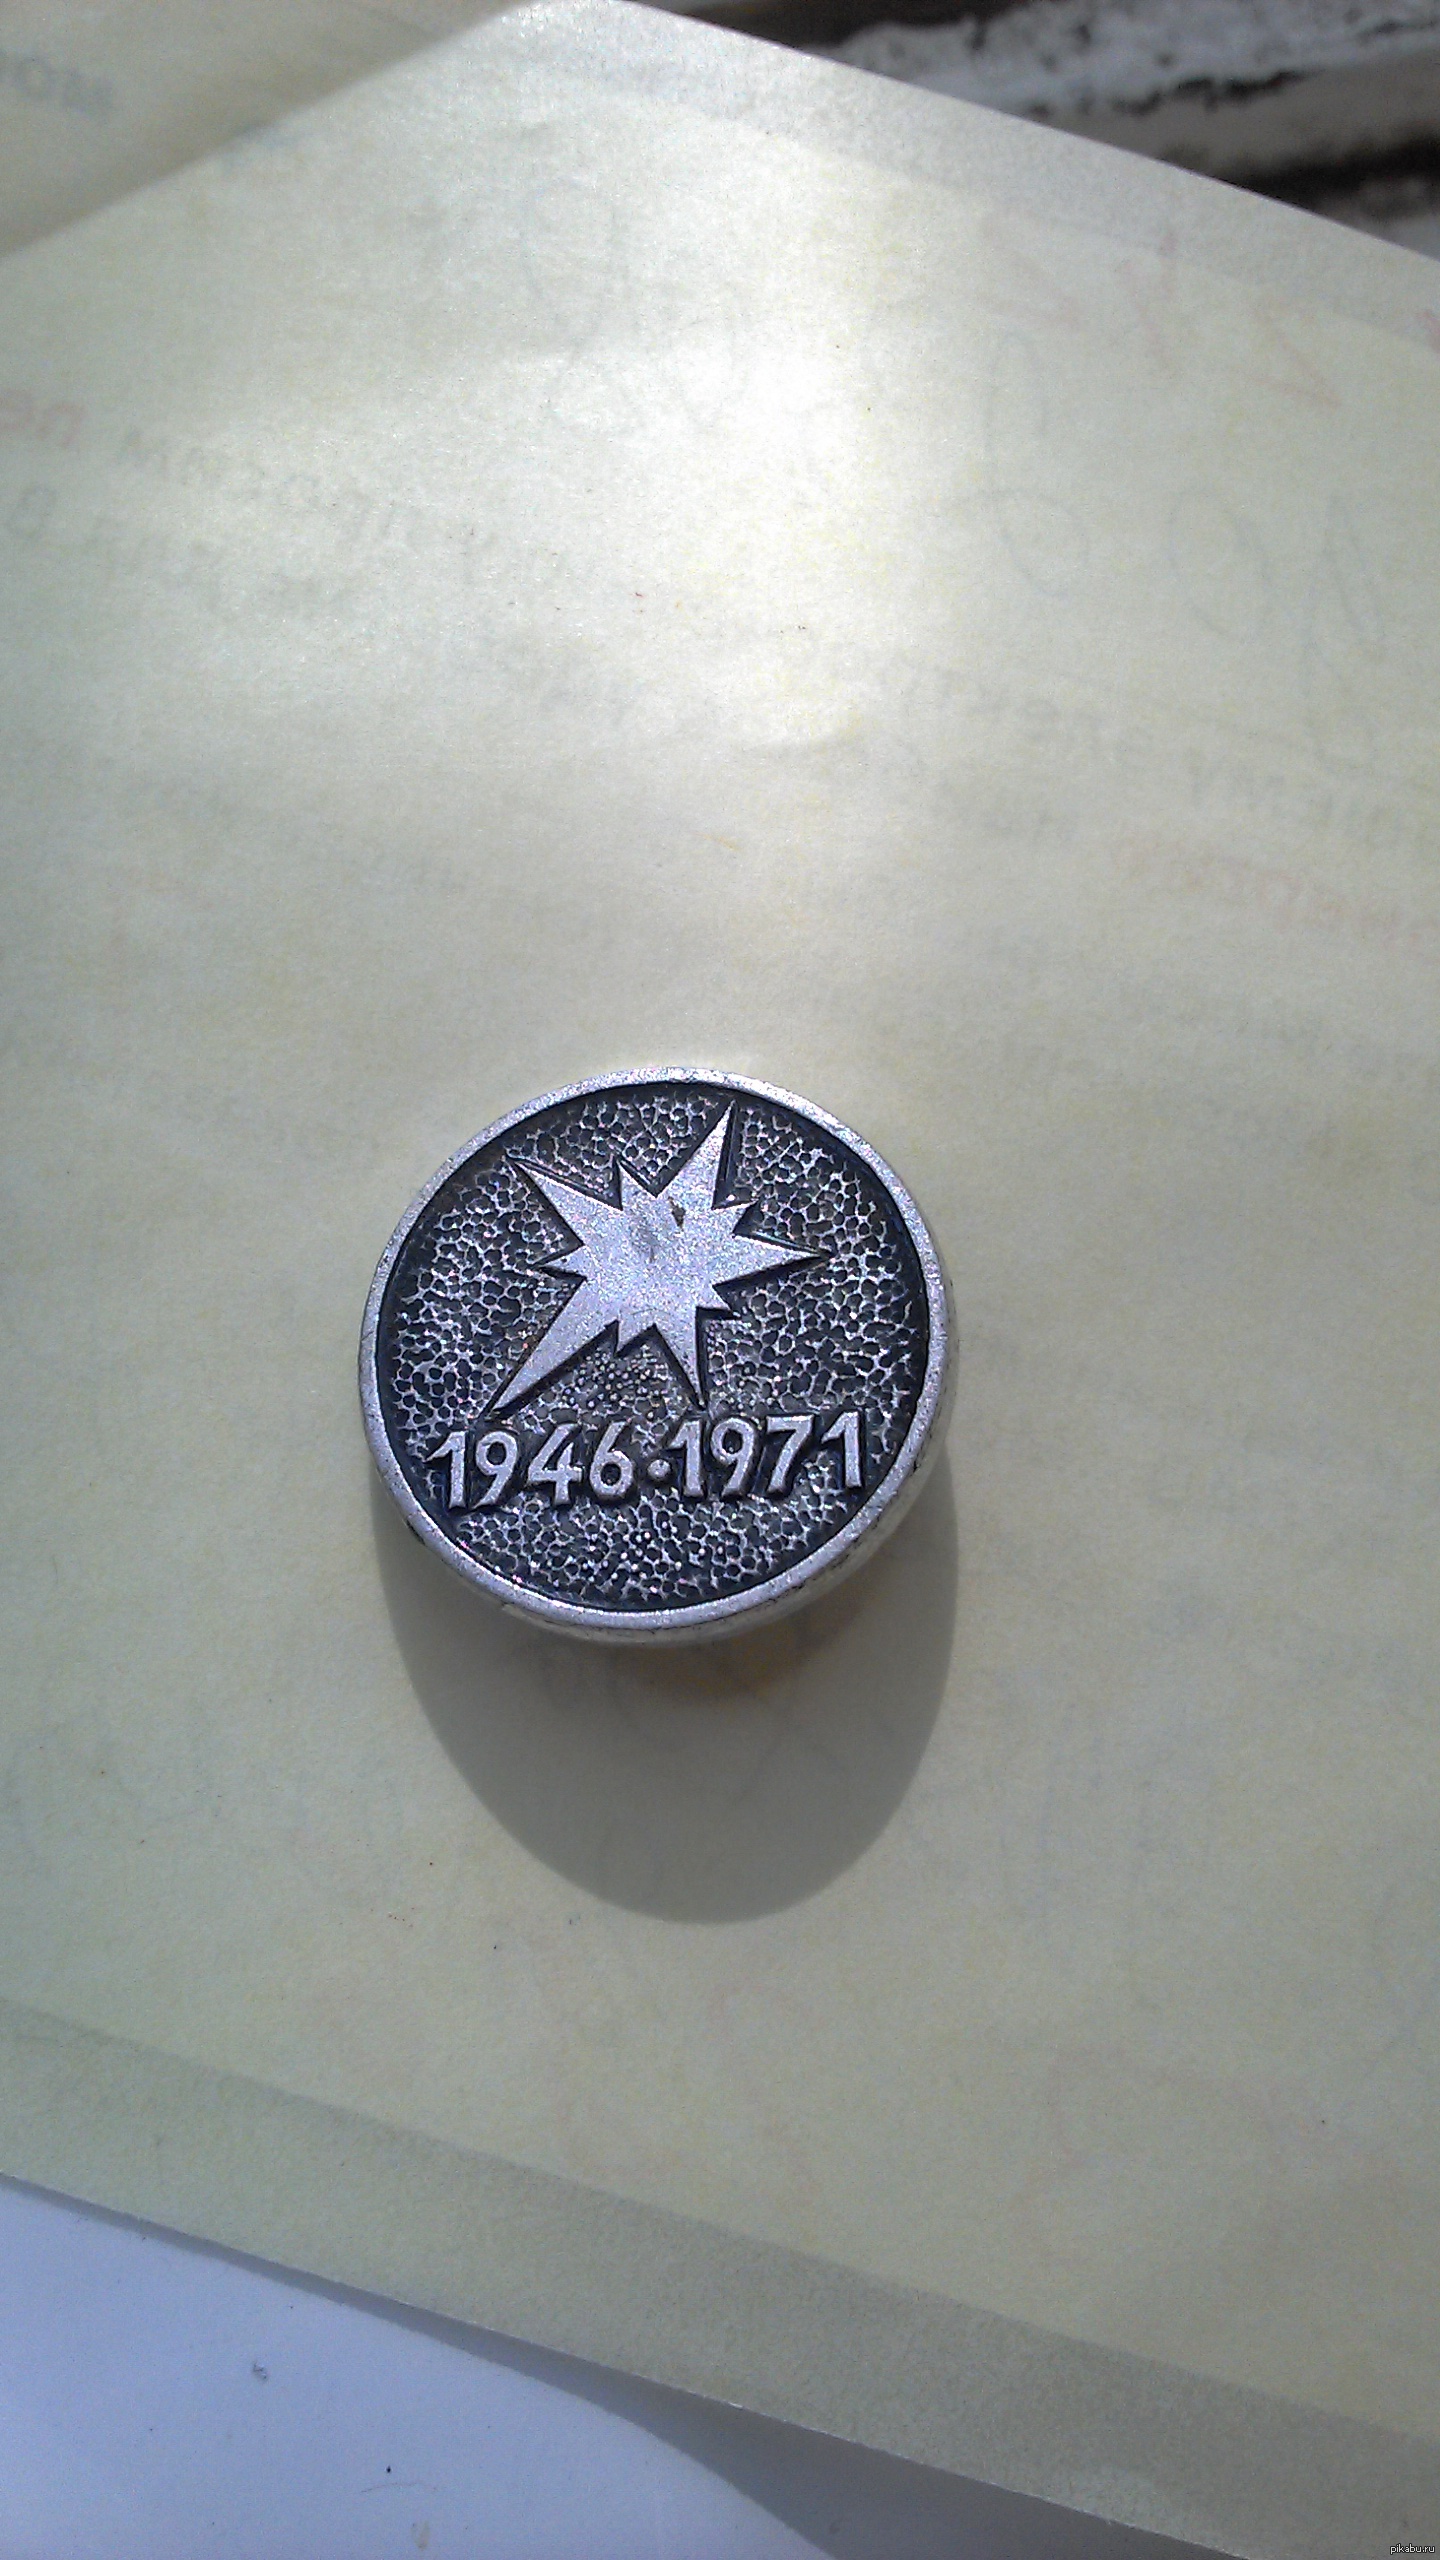 Hey! I dug up a badge with a strange date from a friend. What does it mean? - Icon, the USSR, Help